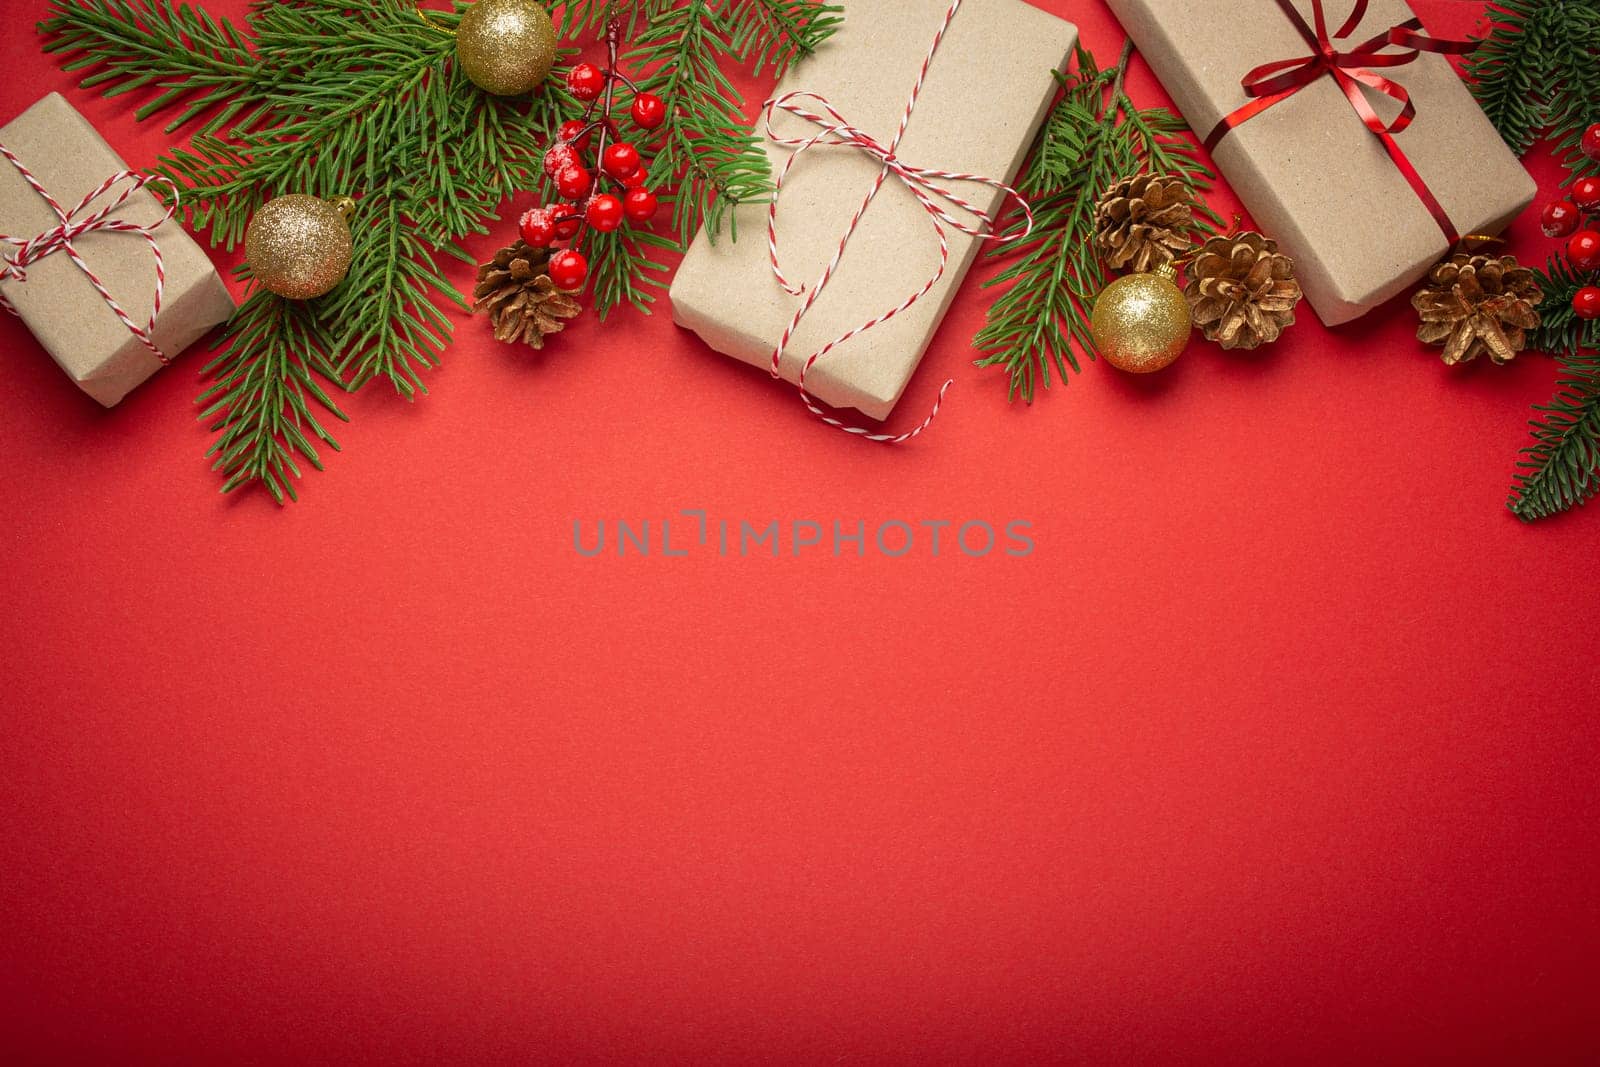 Christmas or New Year celebration red paper festive background with decoration fir tree, wrapped present boxes, cones, berries, sparkly red balls. Space for text..